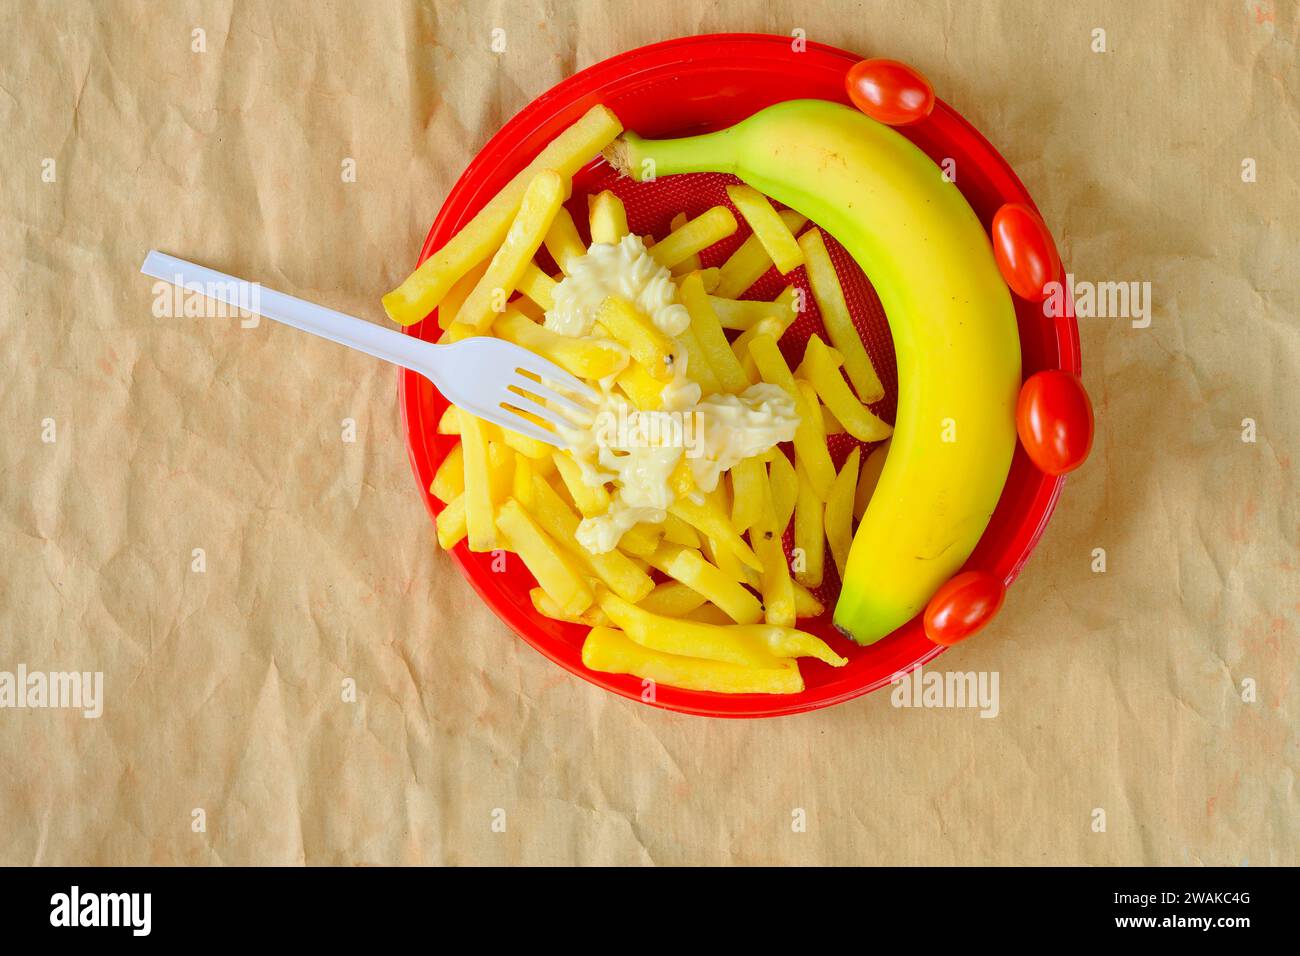 Dieting concept: Plastic plate with greasy french fries and a fresh banana and tomatos. Getting slim and fit for the springtime concept Stock Photo